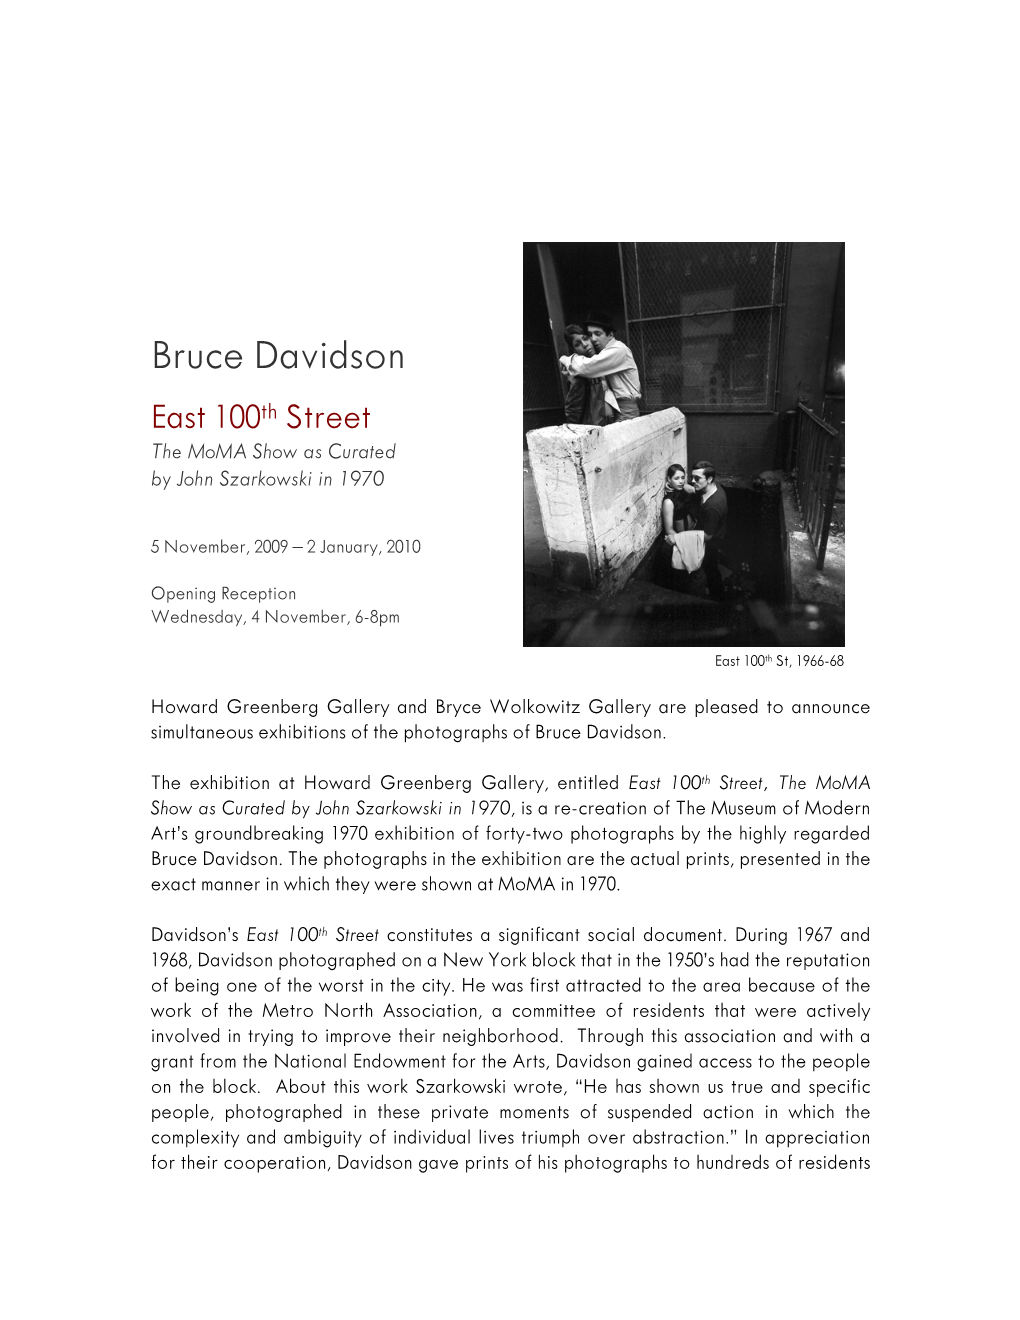 Howard Greenberg Gallery and Bryce Wolkowitz Gallery Are Pleased to Announce Simultaneous Exhibitions of the Photographs of Bruce Davidson